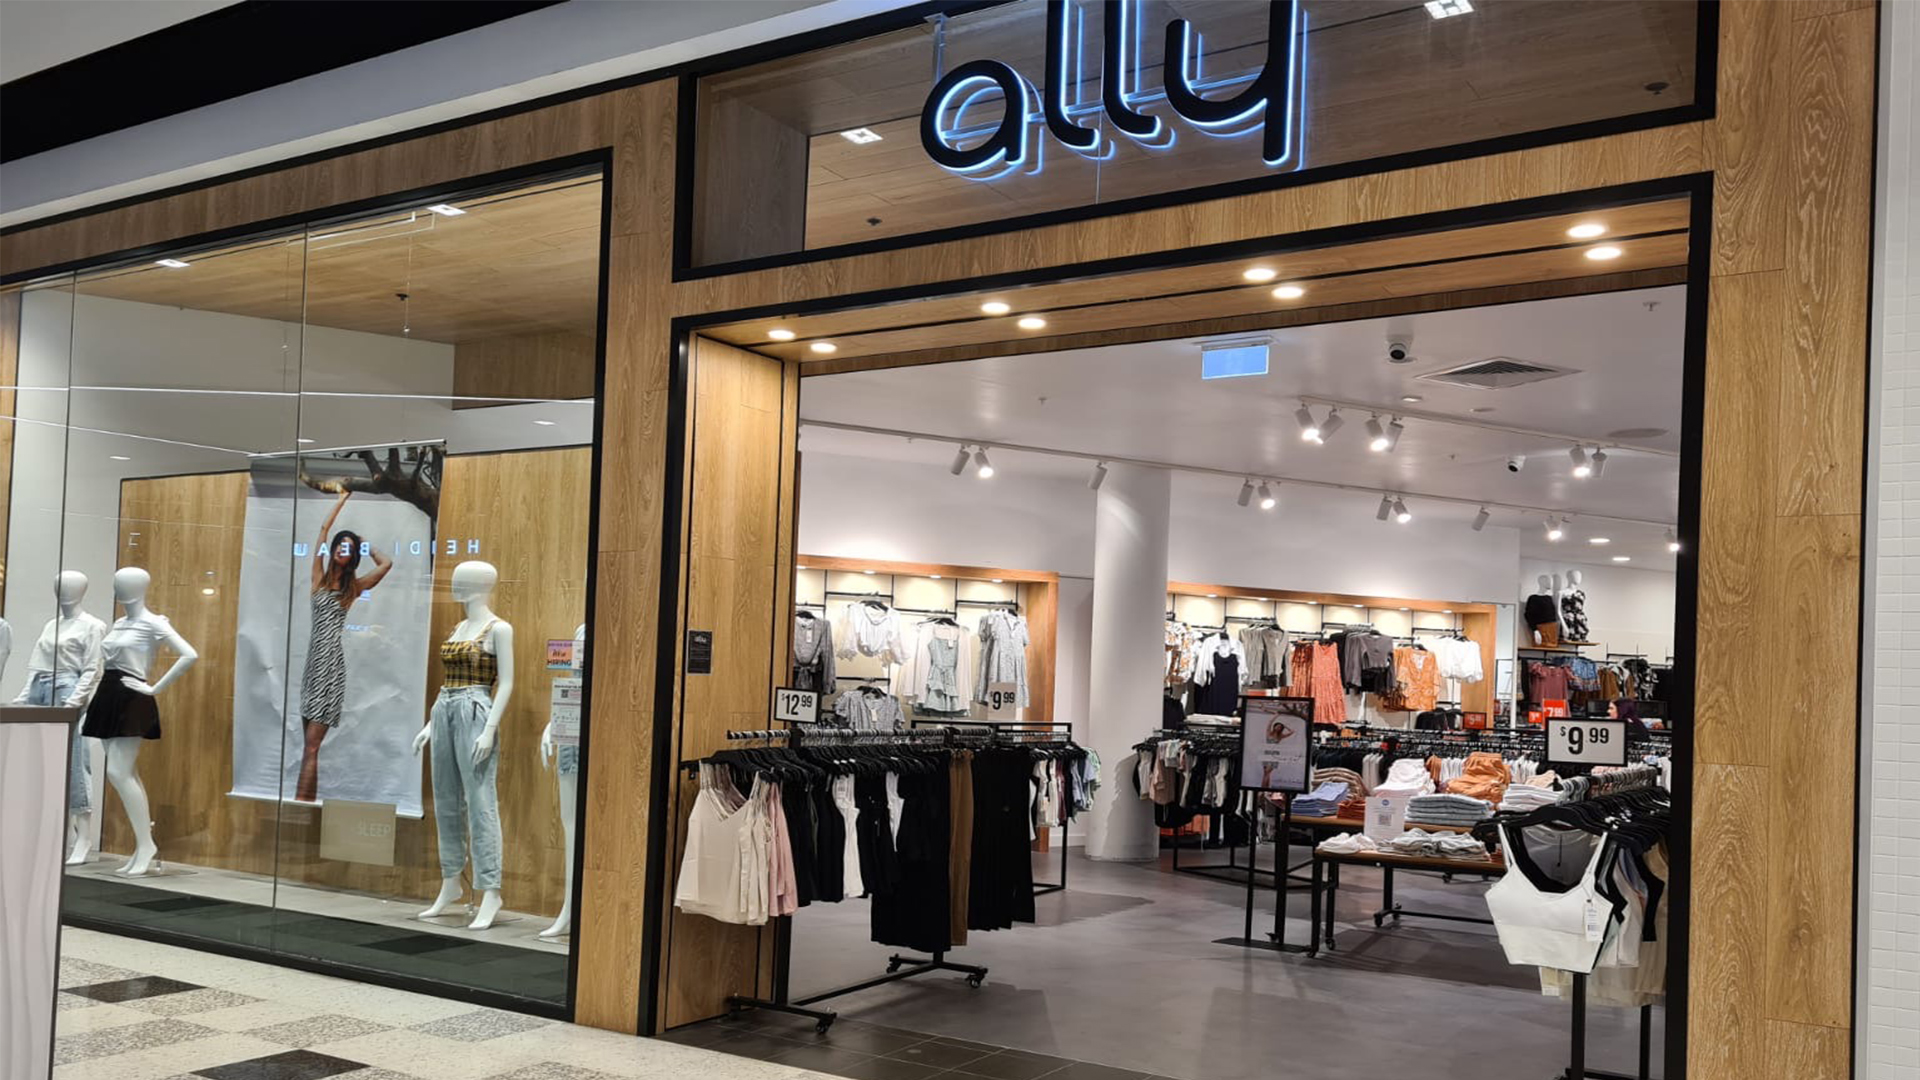 MEET THE RETAILER - ALLY FASHION - The Pines